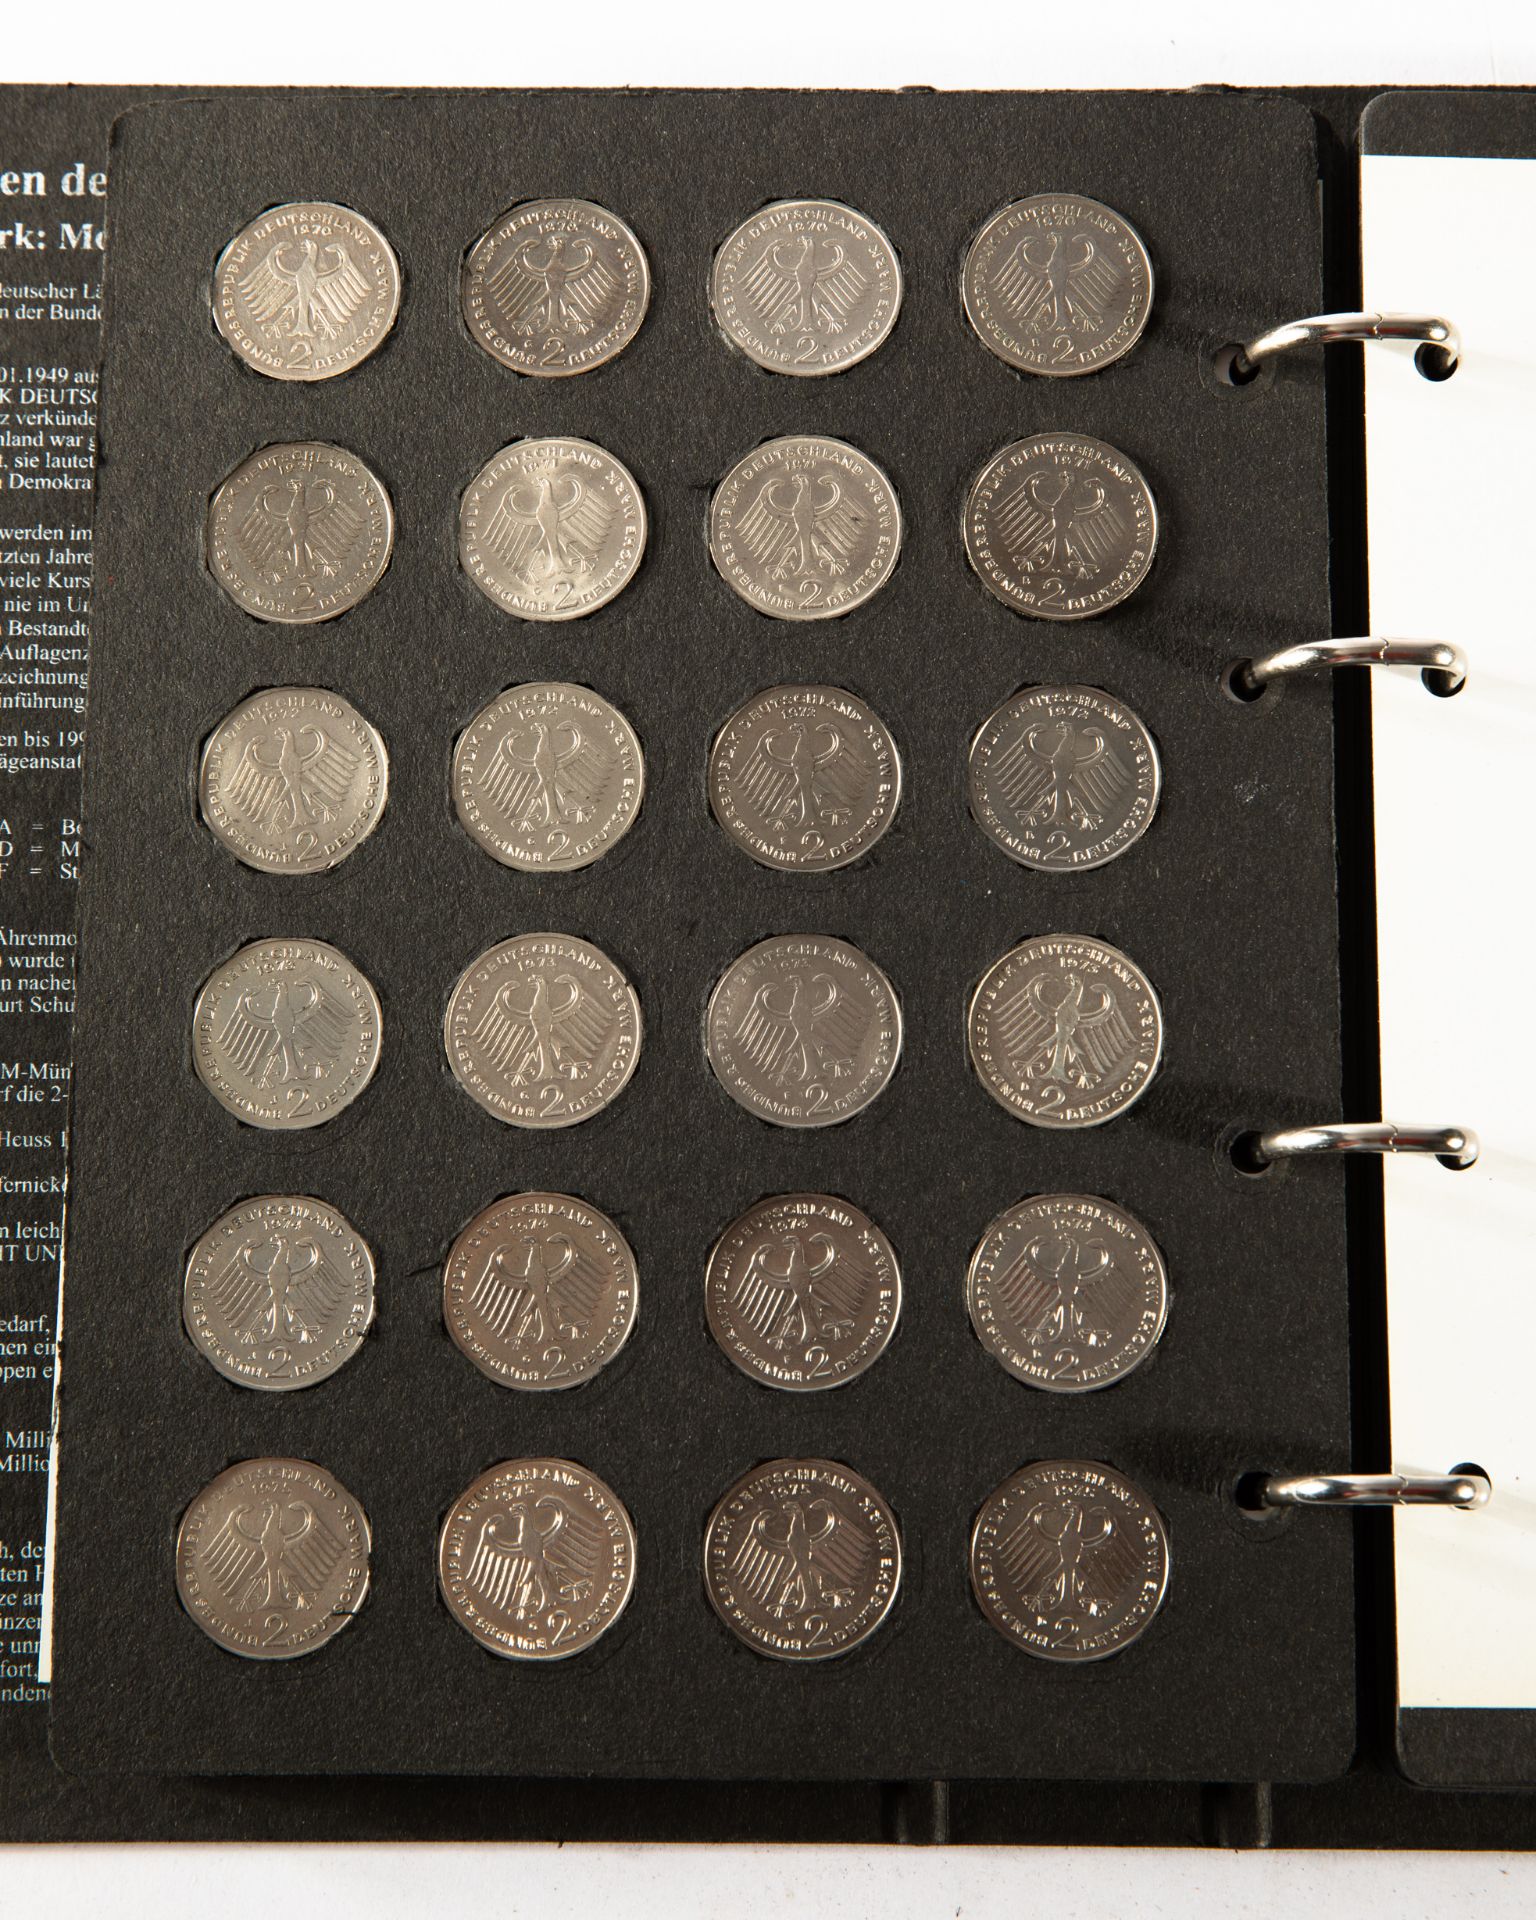 Germany - 2x full coin albums 2 DM Coins 1970-1996 - Image 12 of 33